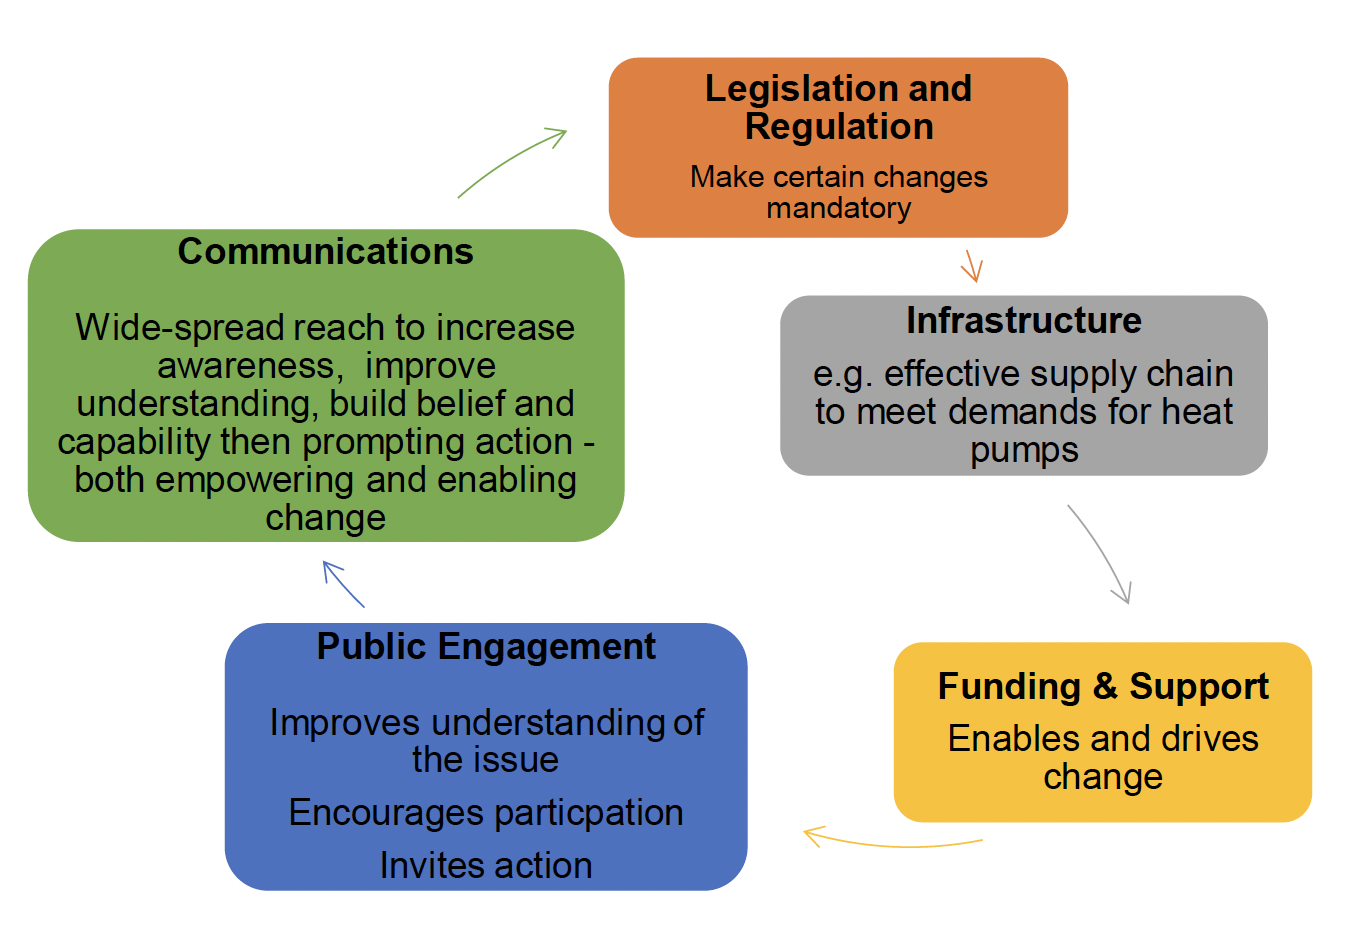 A circular flow chart showing the process between communications, legislation and regulation, infrastructure, funding and support, and public engagement.